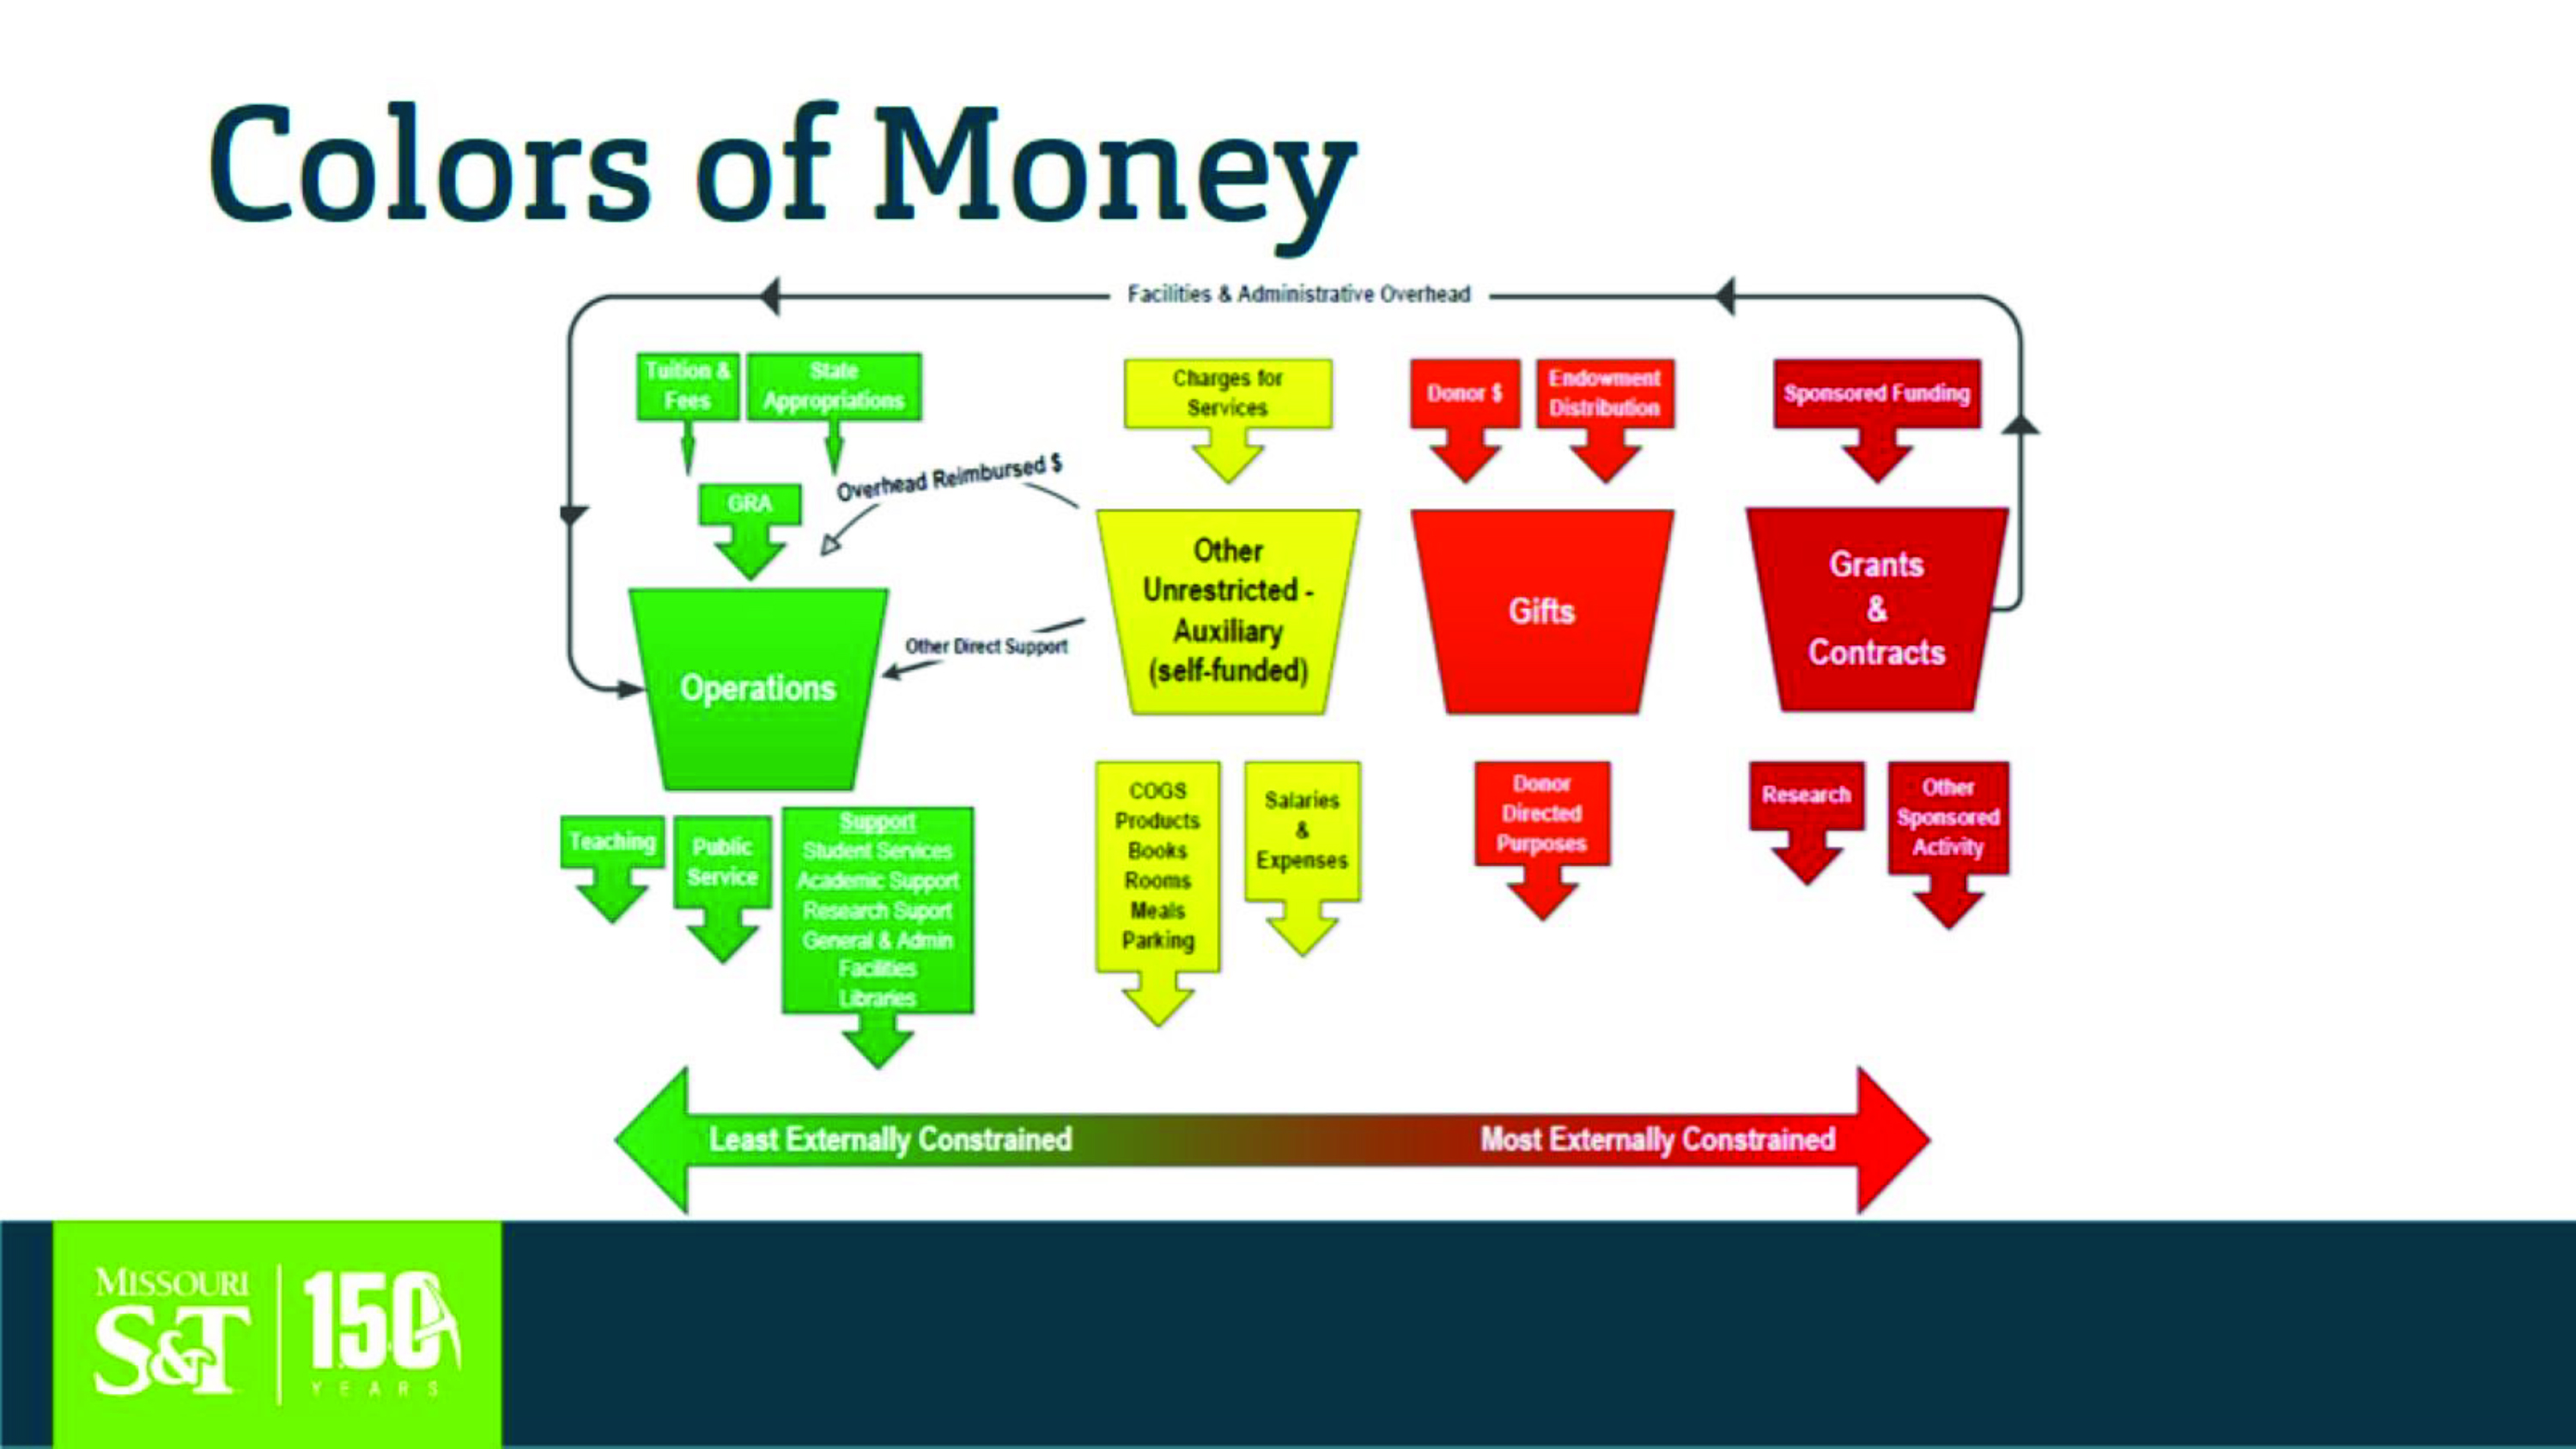 Graphic showing types of funds, ranging from least externally constrained (green) to most externally constrained funds (red)